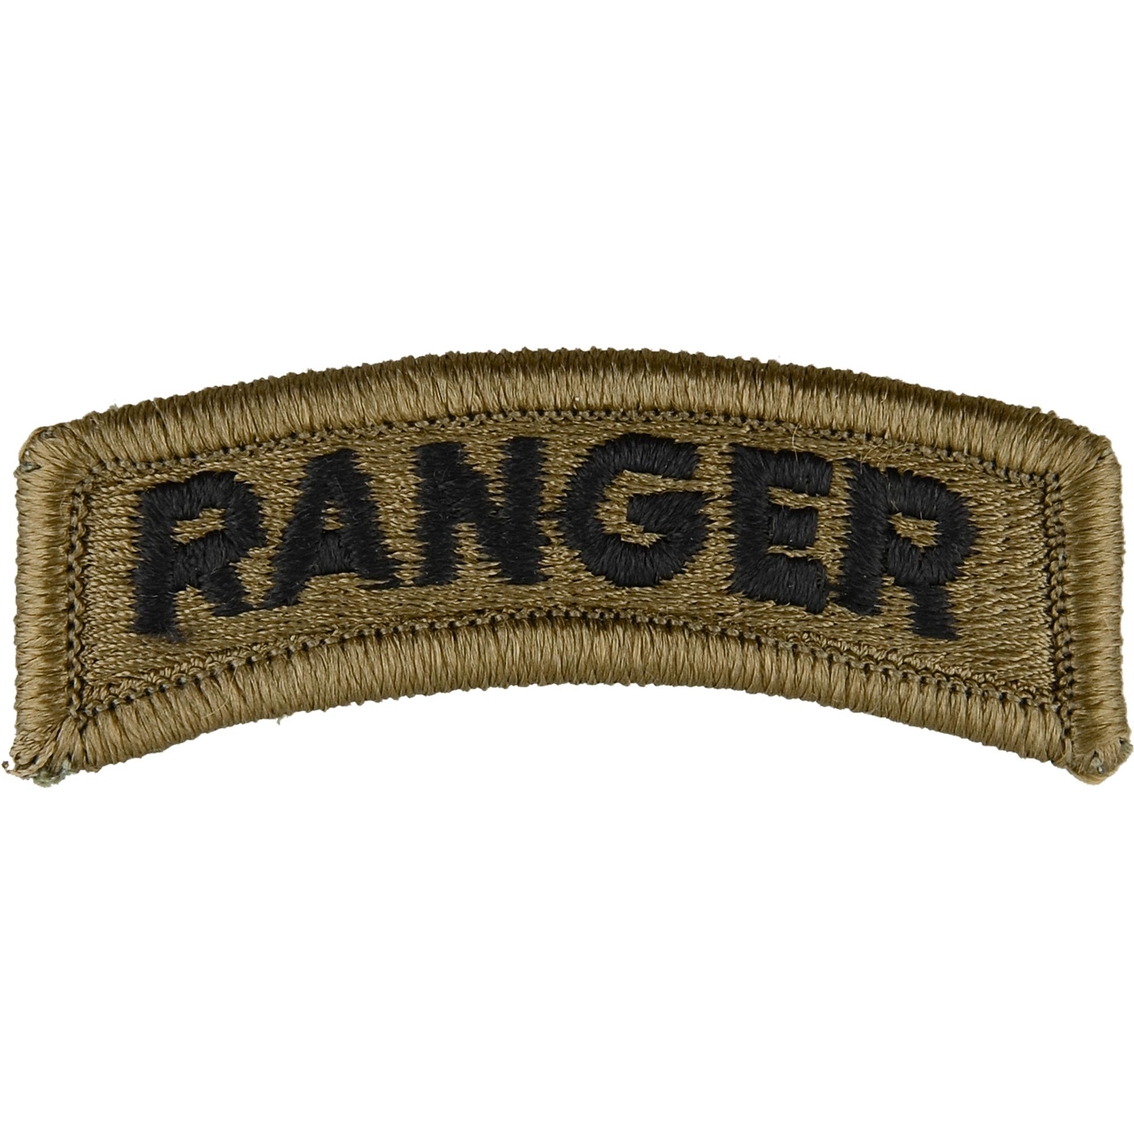 YELLOW ON BLUE US ROTC RANGER TAB PATCH 